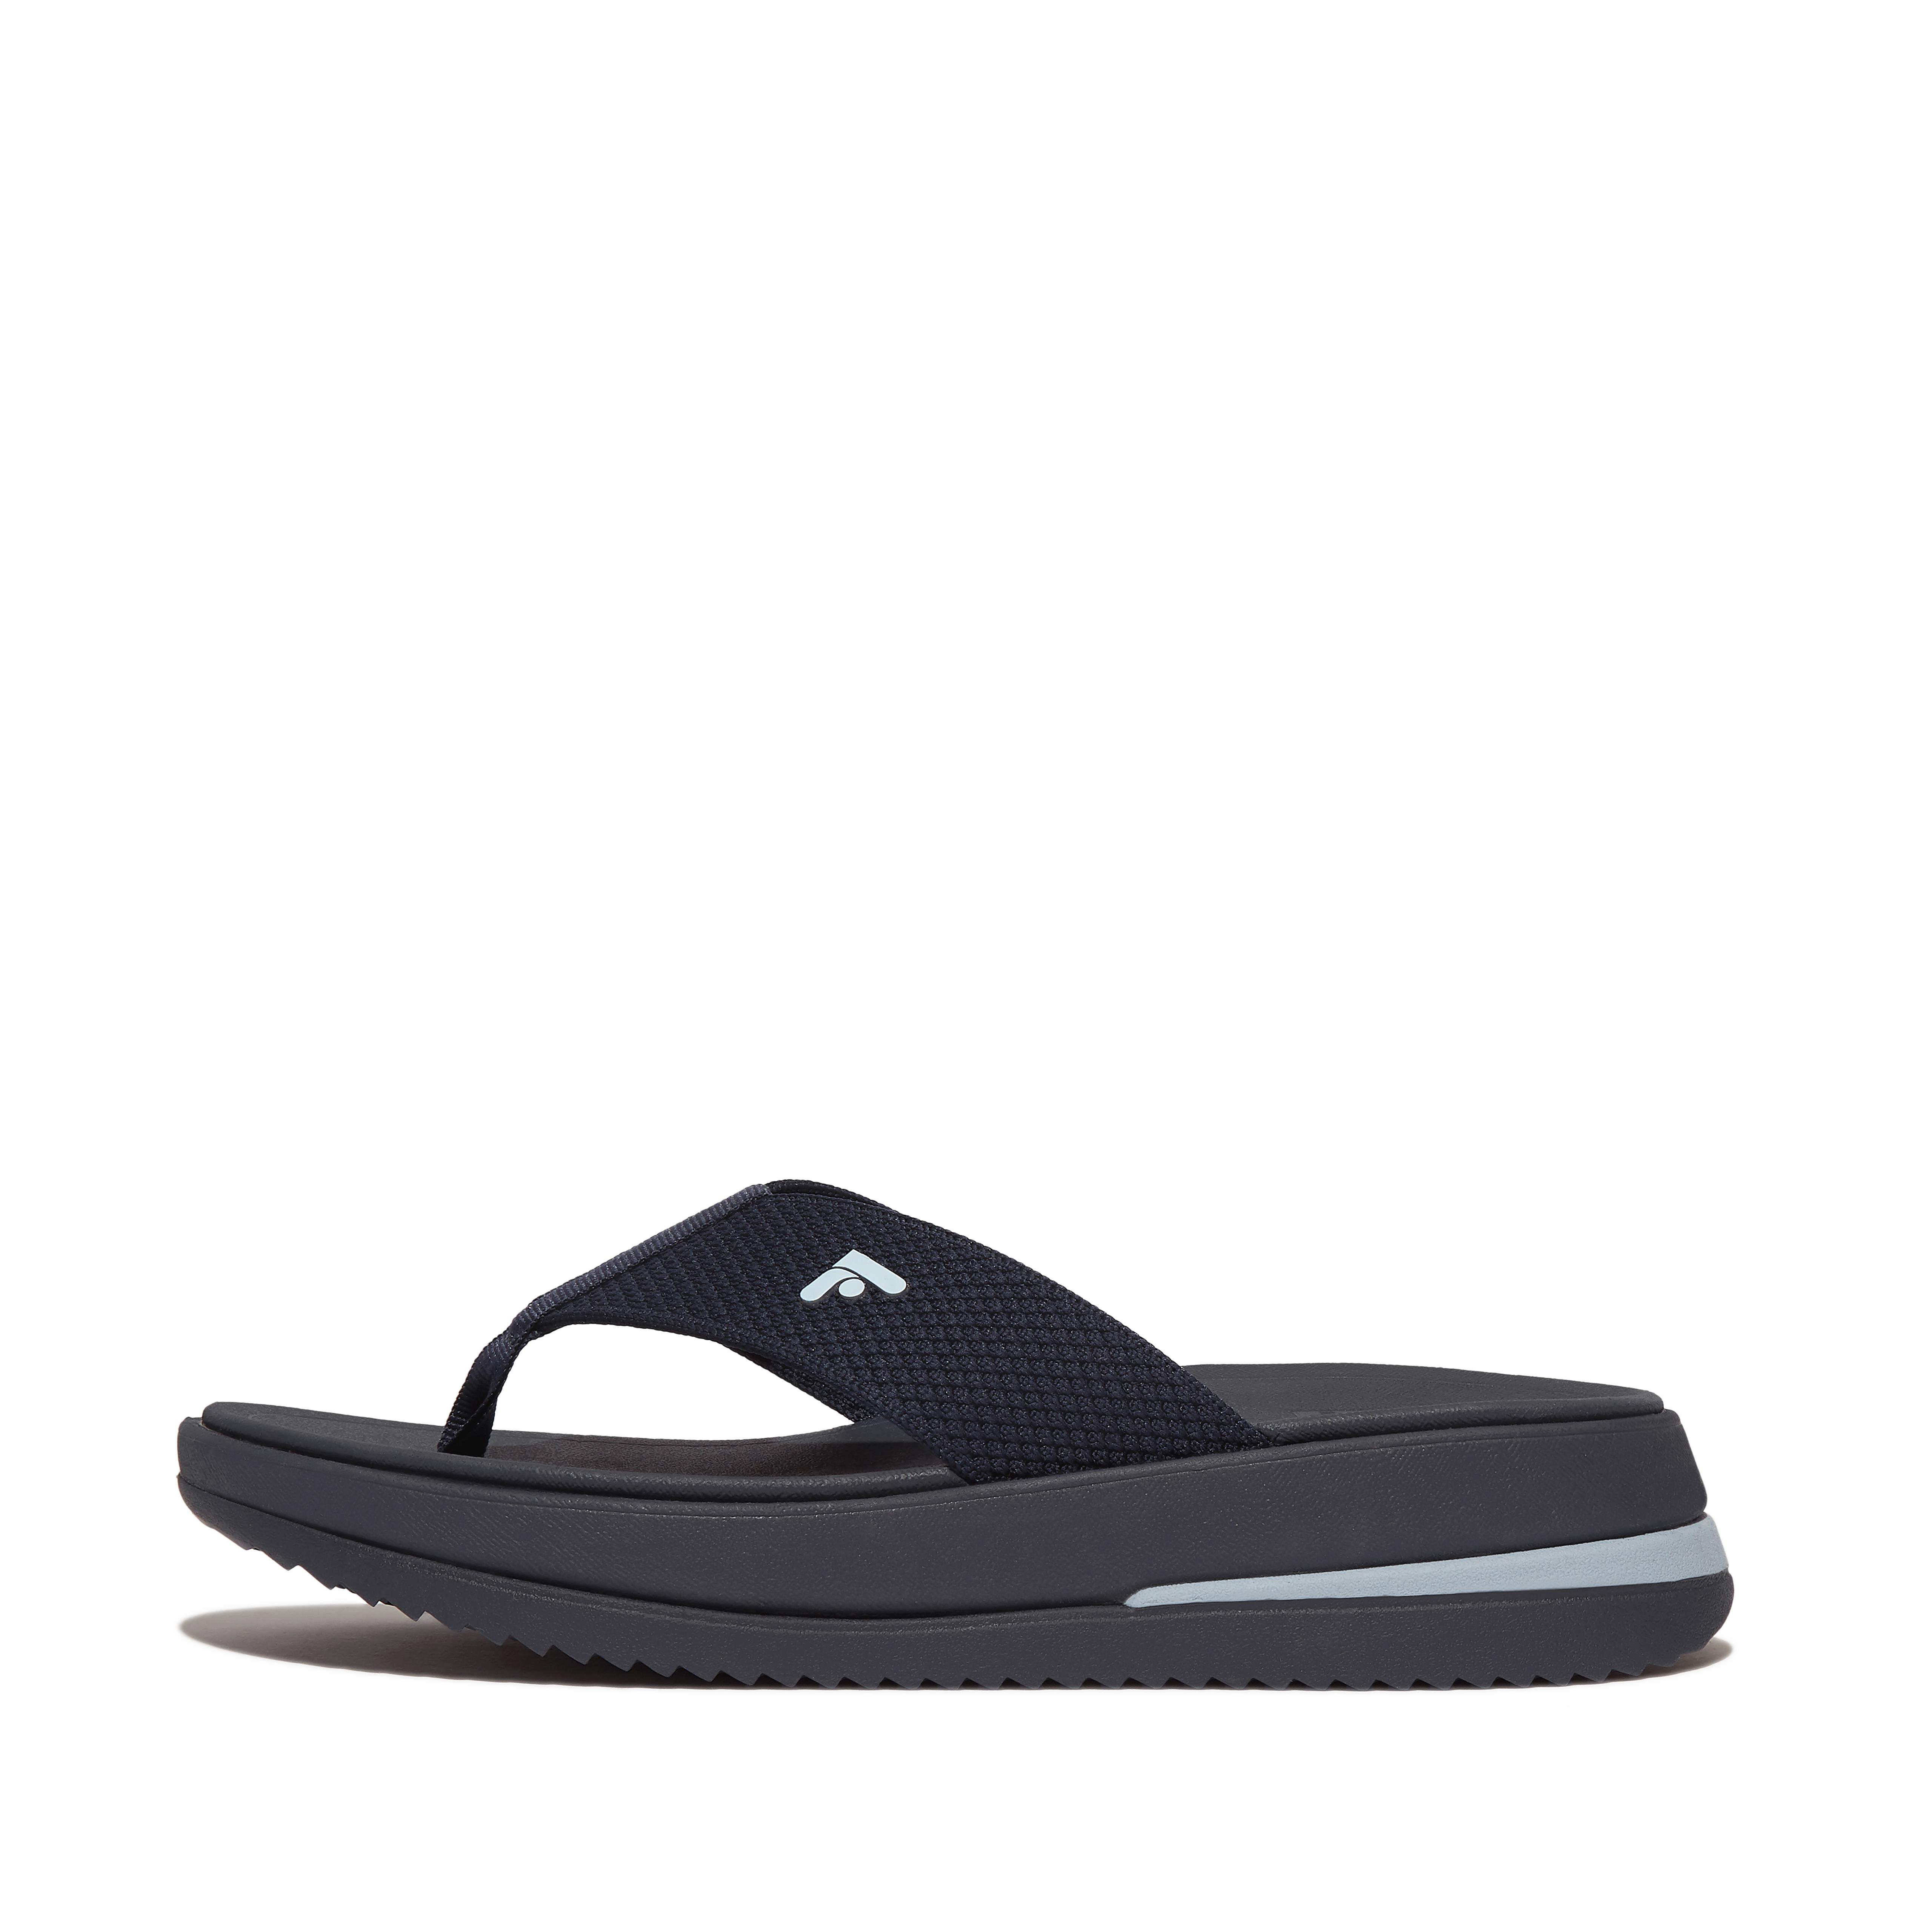 Fitflop Sports-Webbing Toe-Post Sandals,Midnight Navy